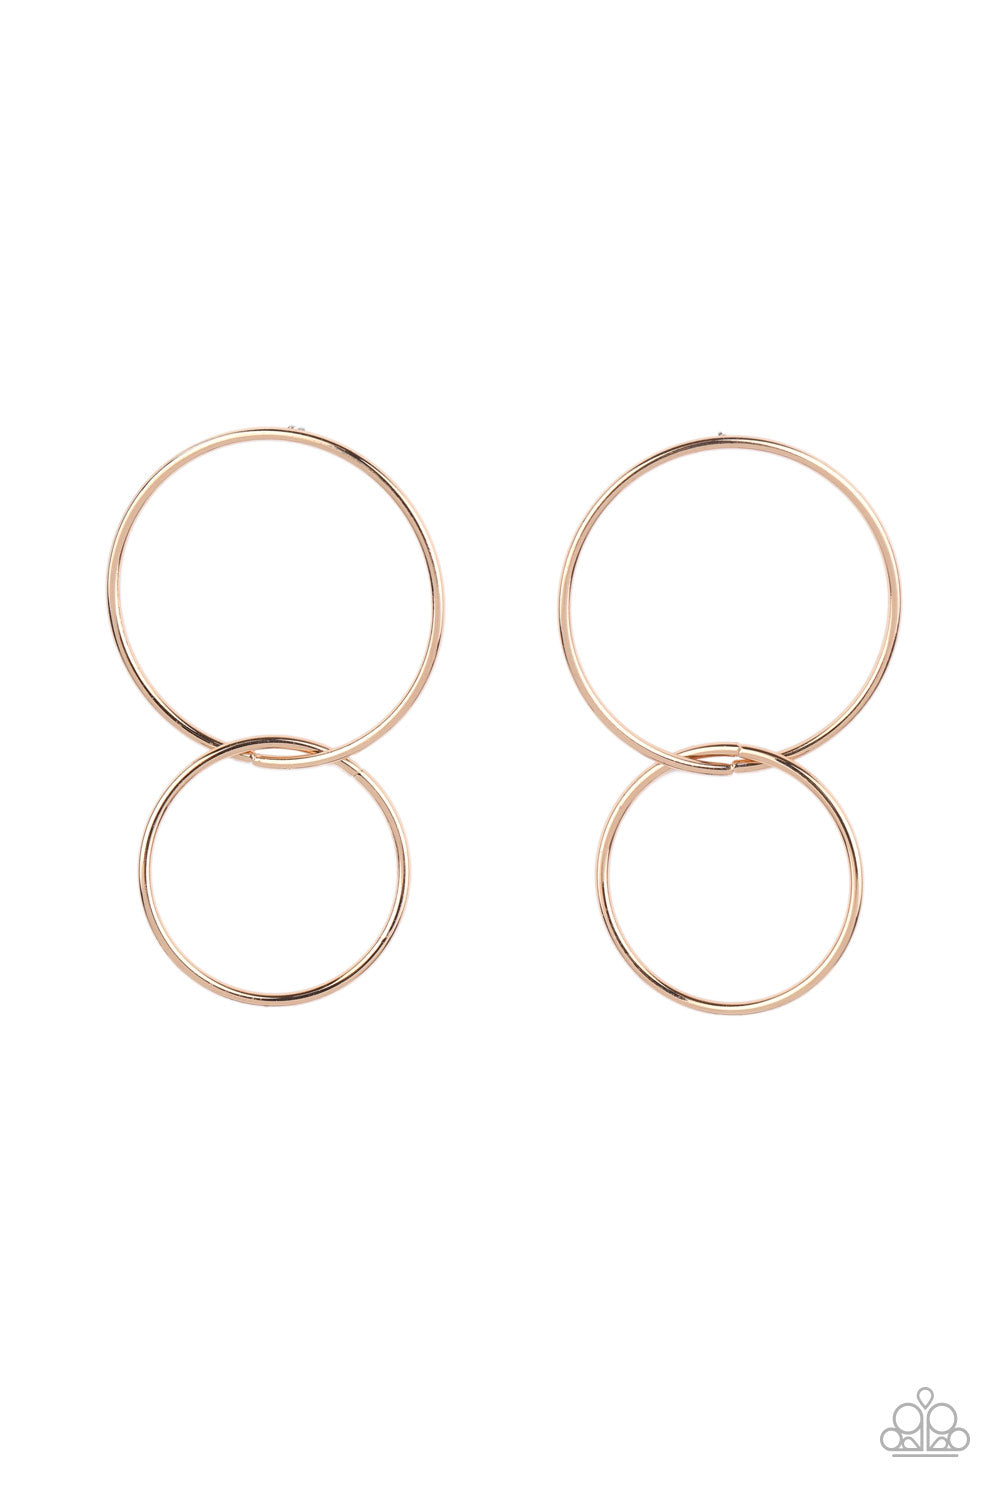 Paparazzi Accessories City Simplicity - Gold Earrings - Lady T Accessories